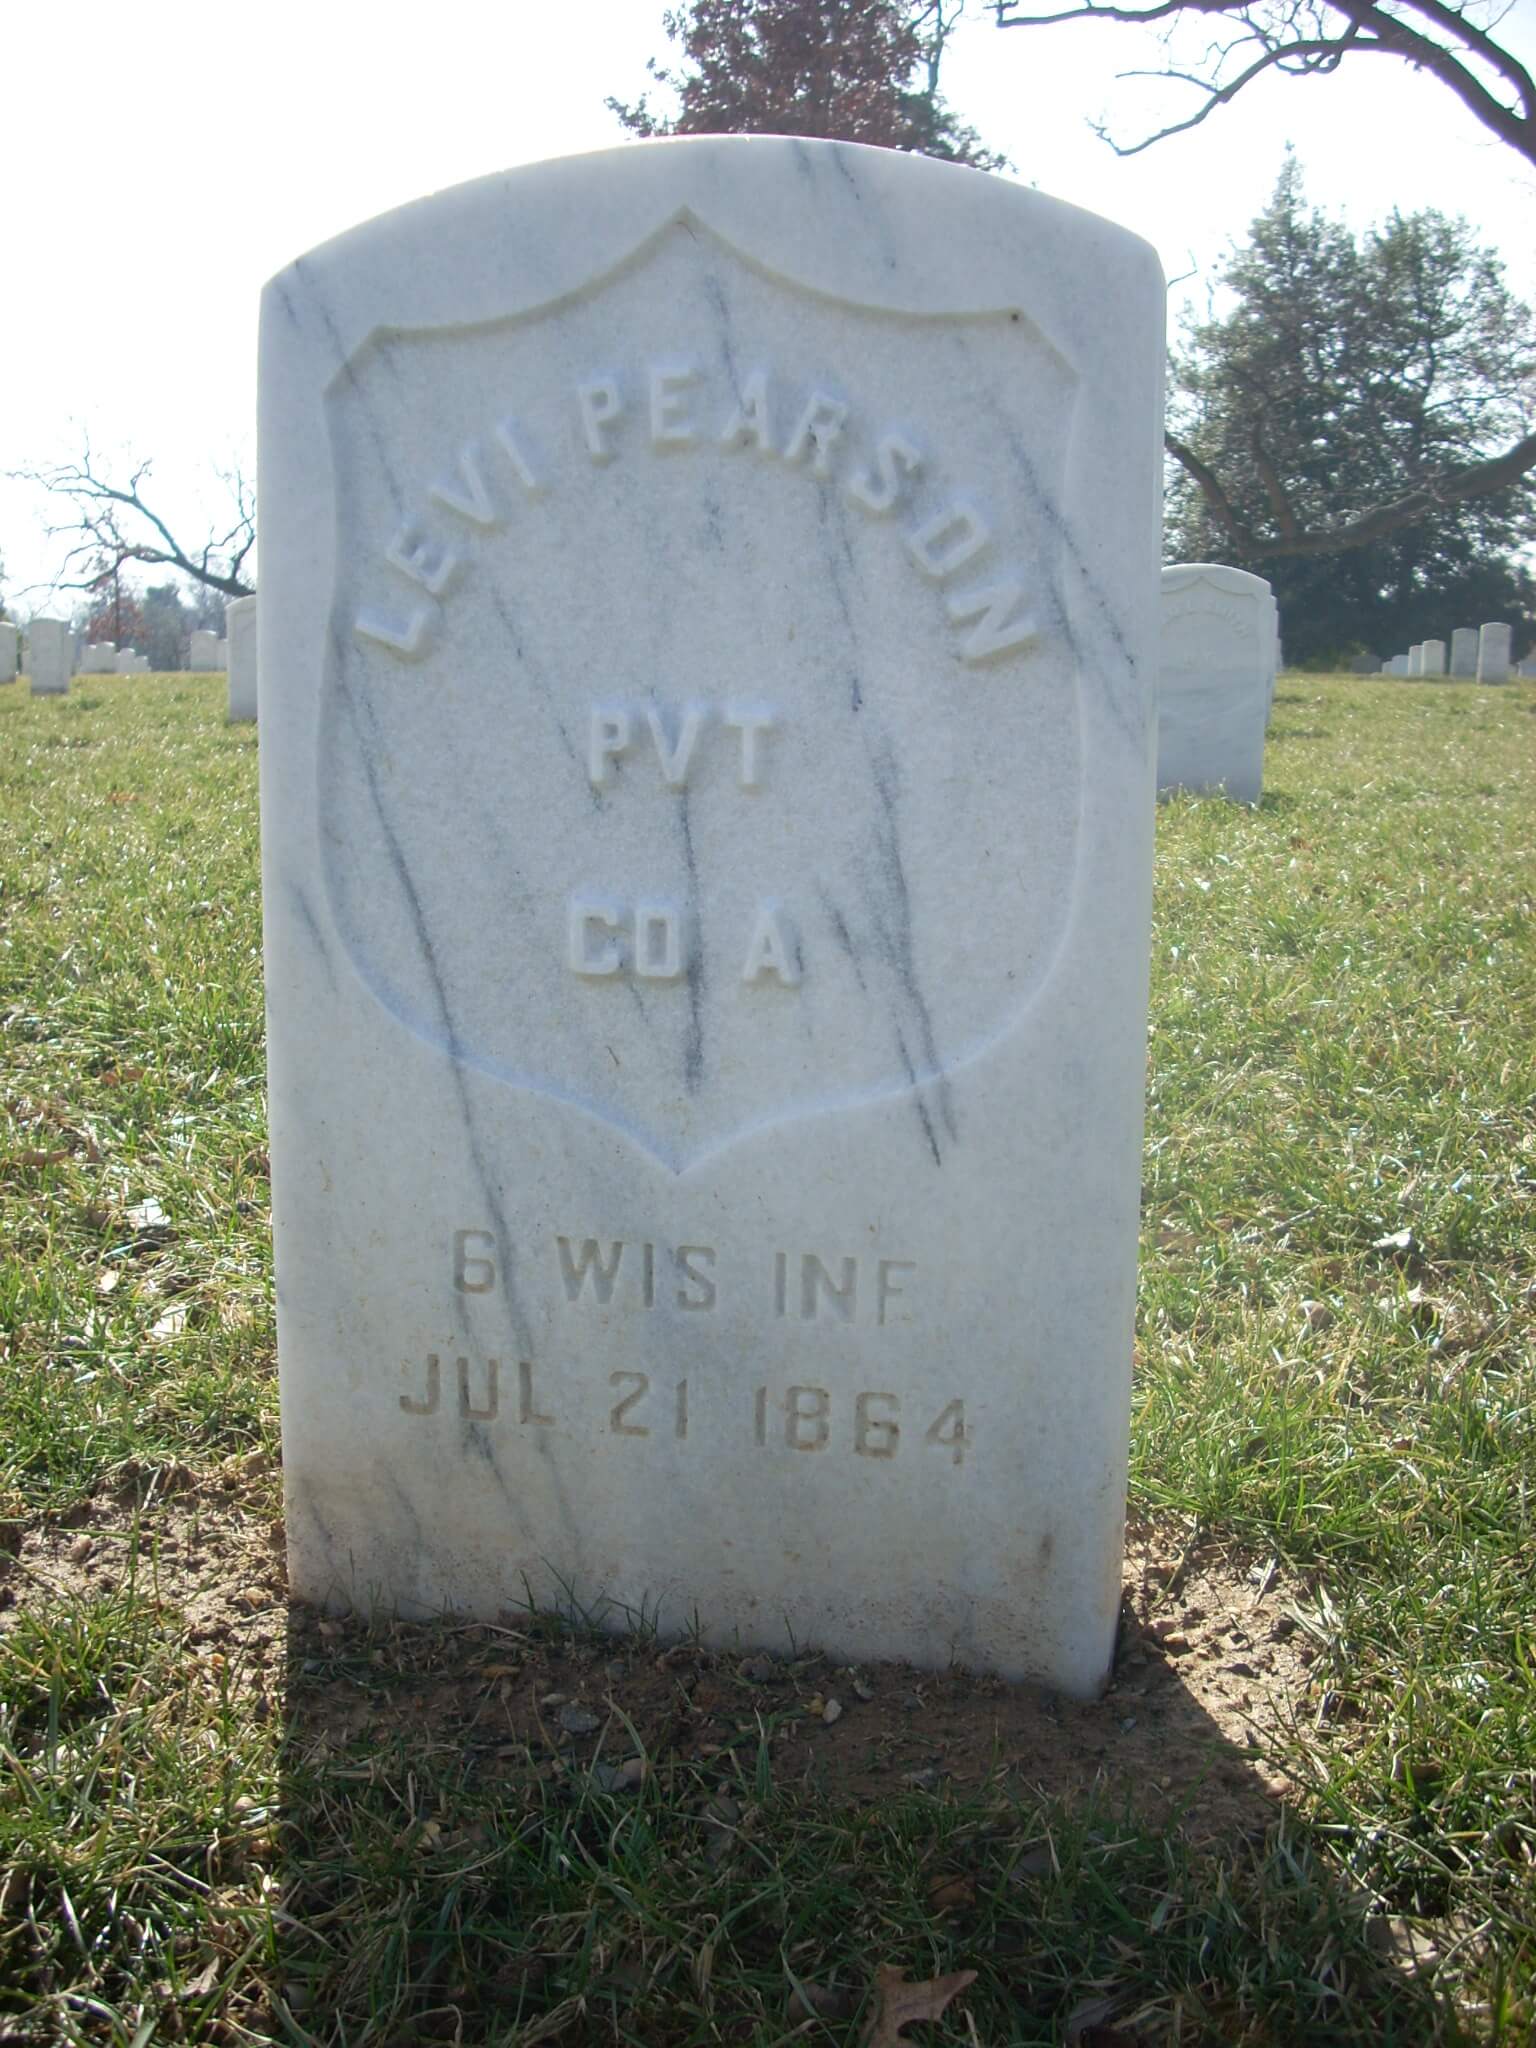 levi-pearson-gravesite-photo-by-holly-february-2011-003